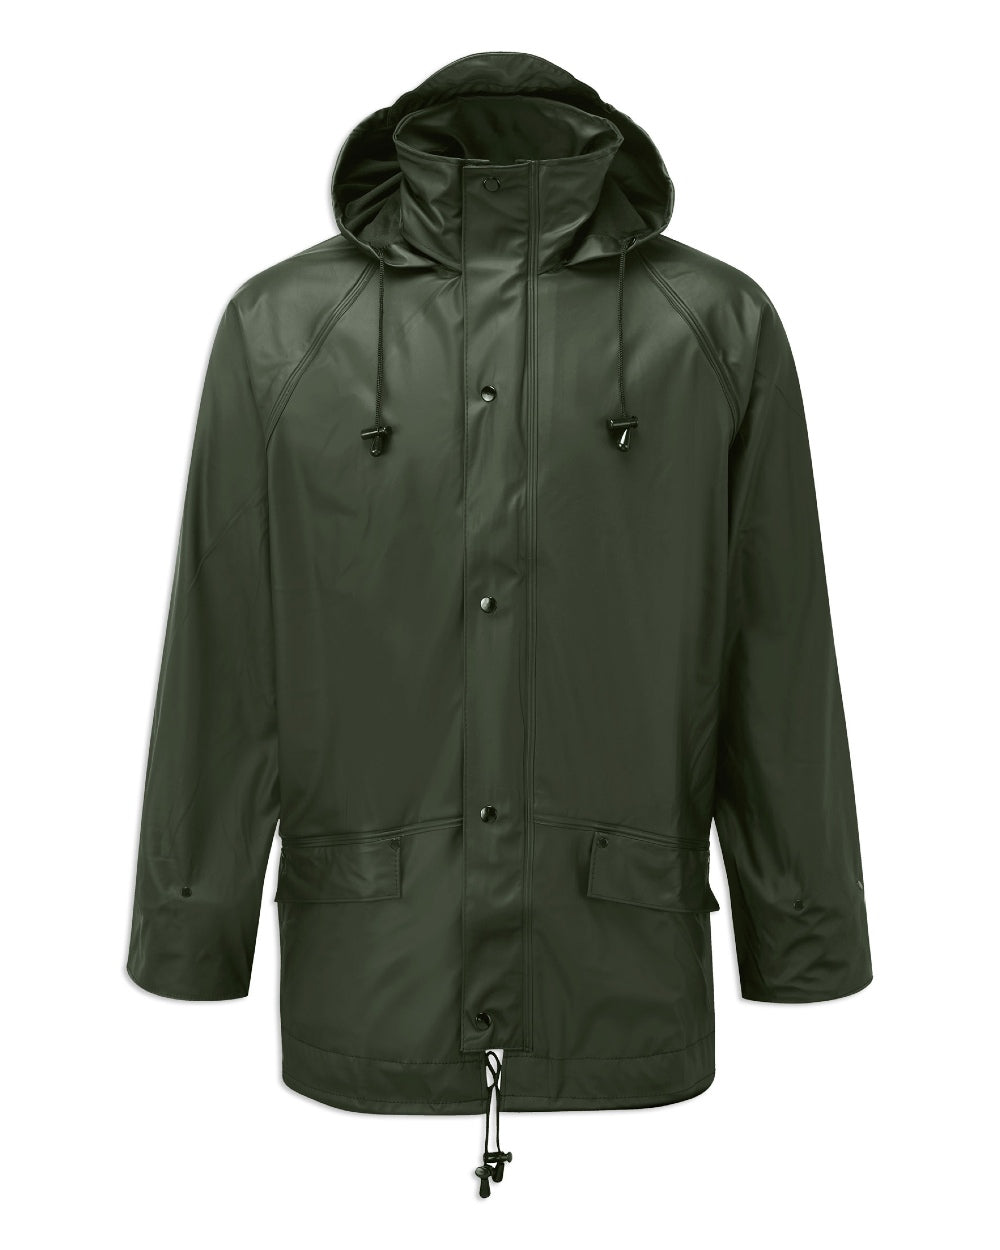 Fort Airflex Fortex Breathable Waterproof Jacket in Olive 